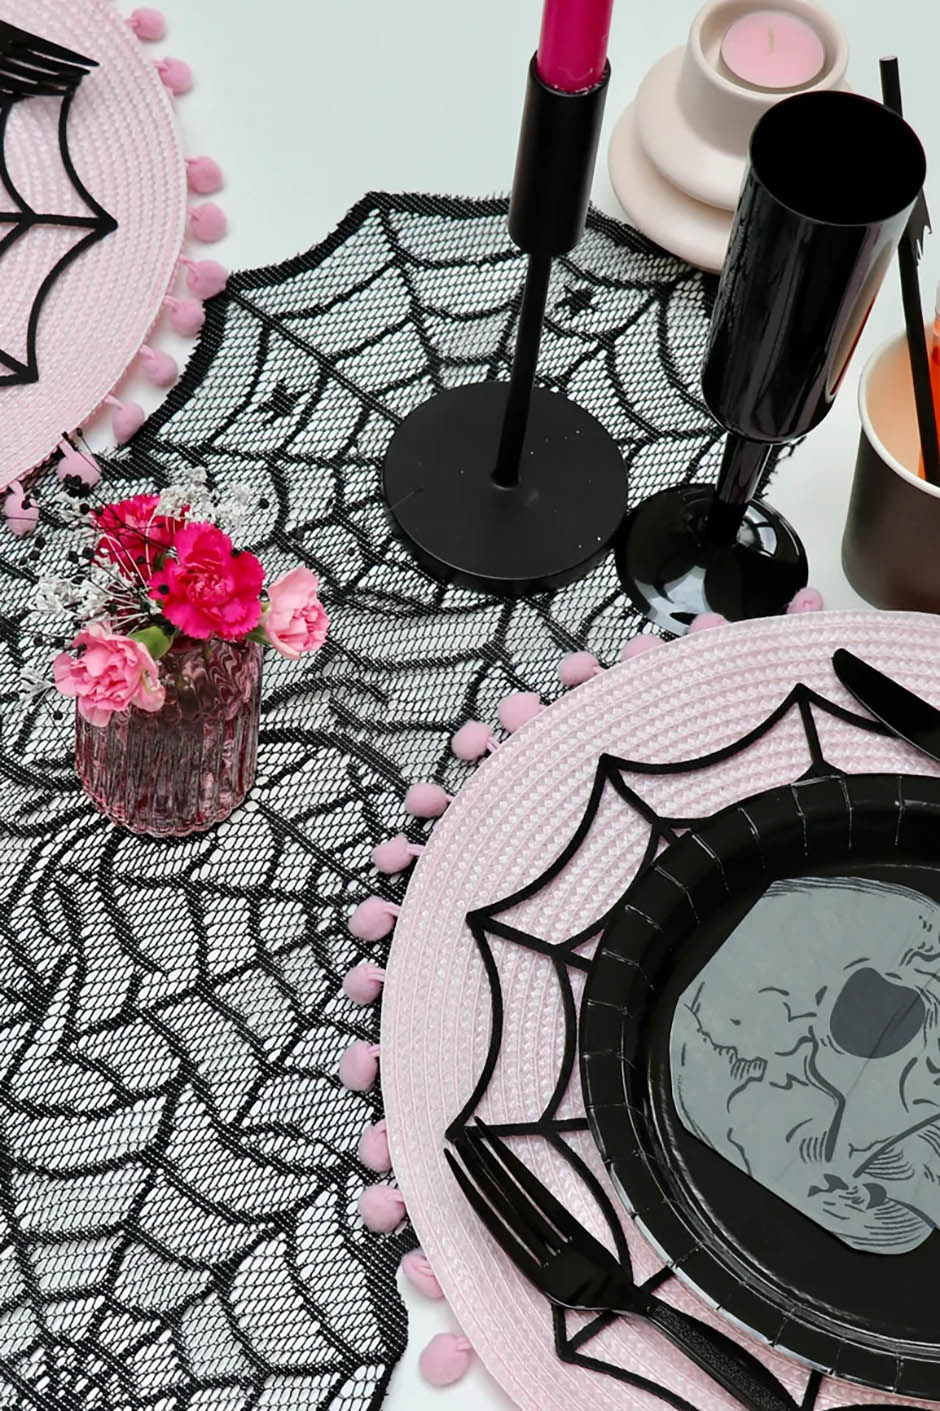 Gothic table decor for hen party theme with lace spider web table runner, black cups, candles and more